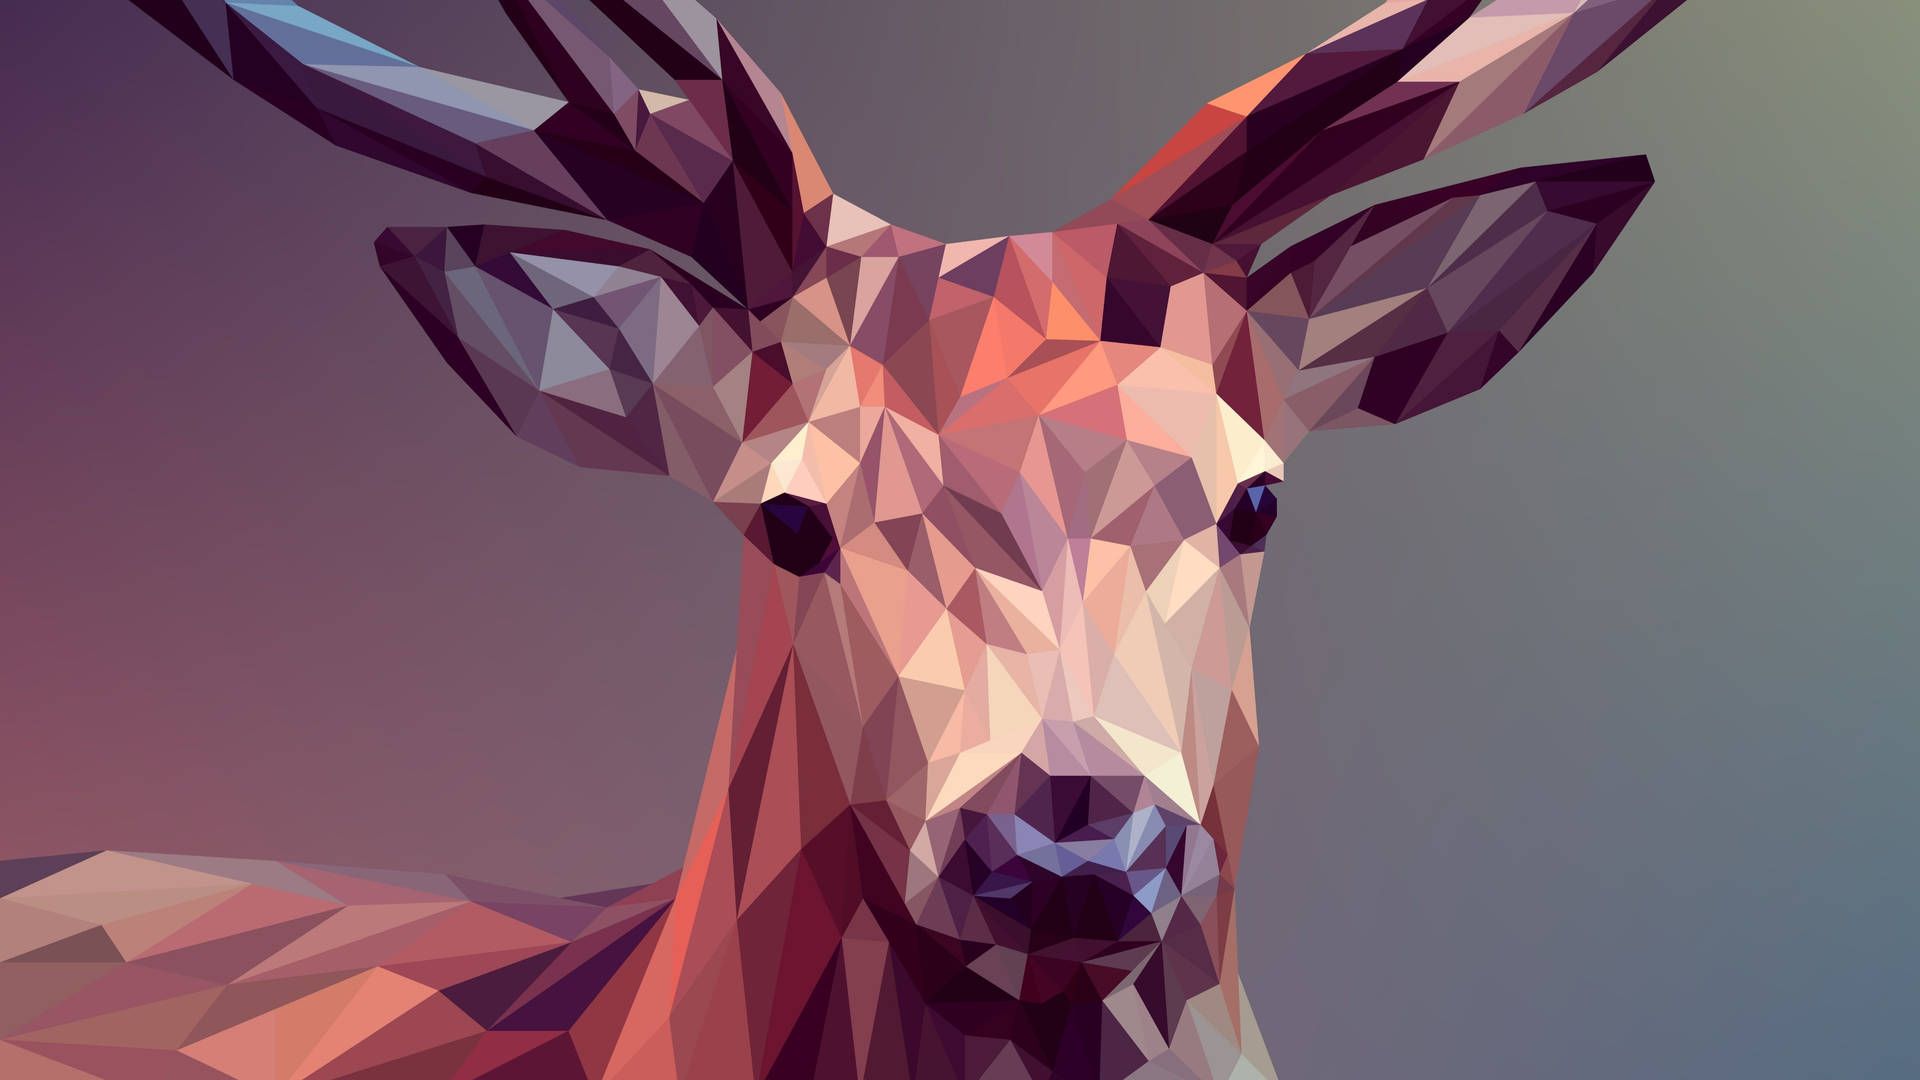 A low poly deer wallpaper for your computer desktop. - Low poly